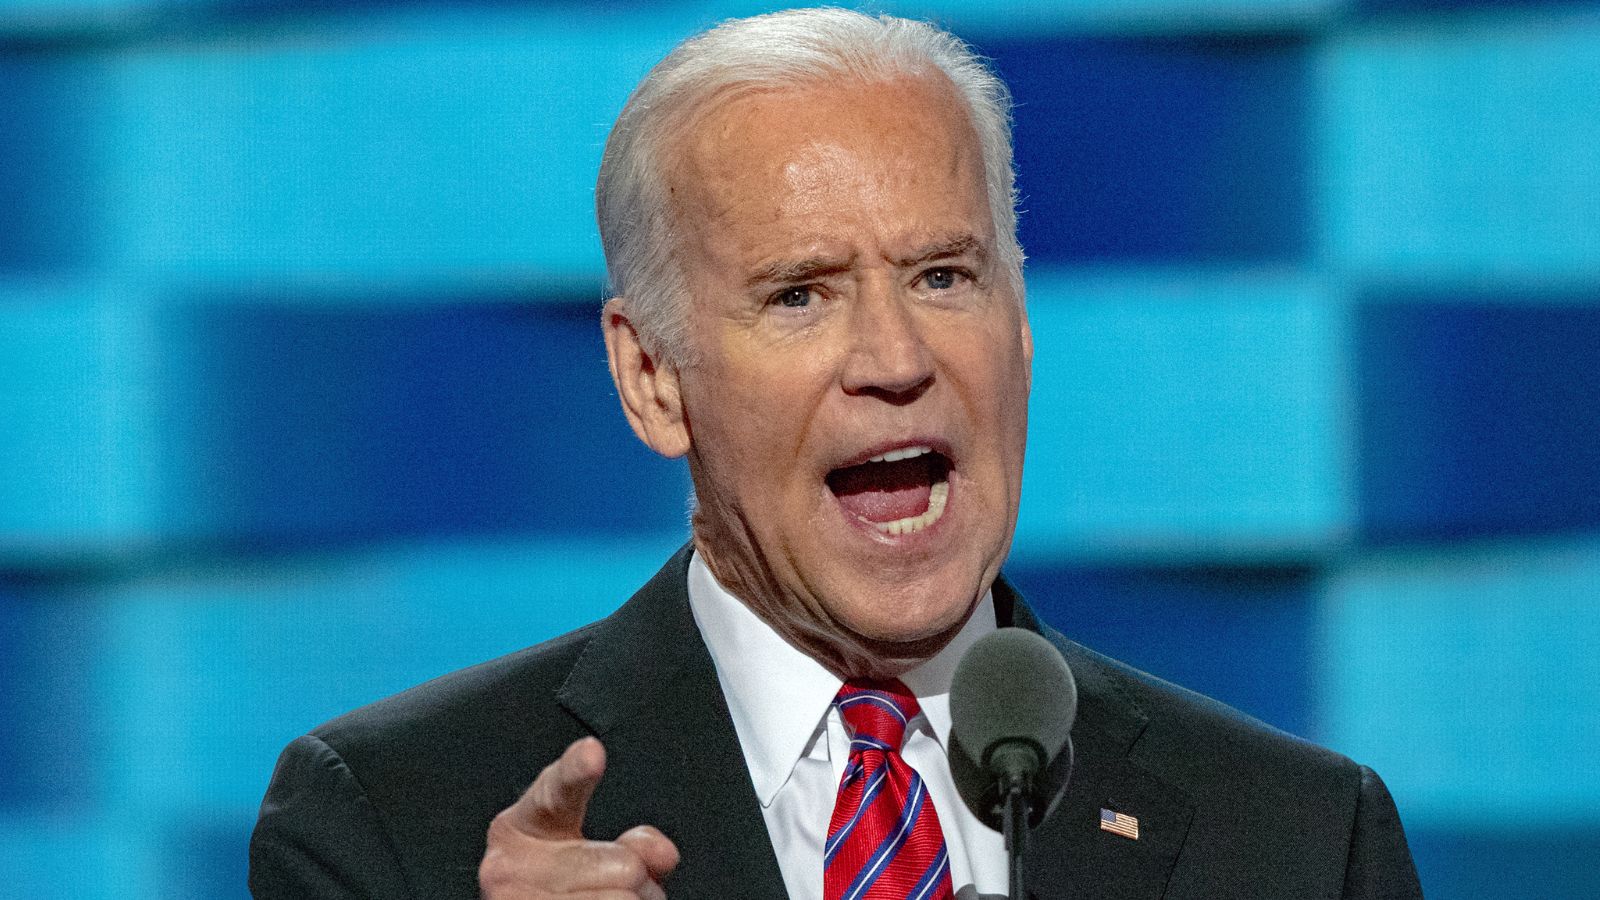 “A Large Portion of America’s Population Has Sociopathic Tendencies”: Biden Proposed Social Security Reforms and Rich People Are Upset